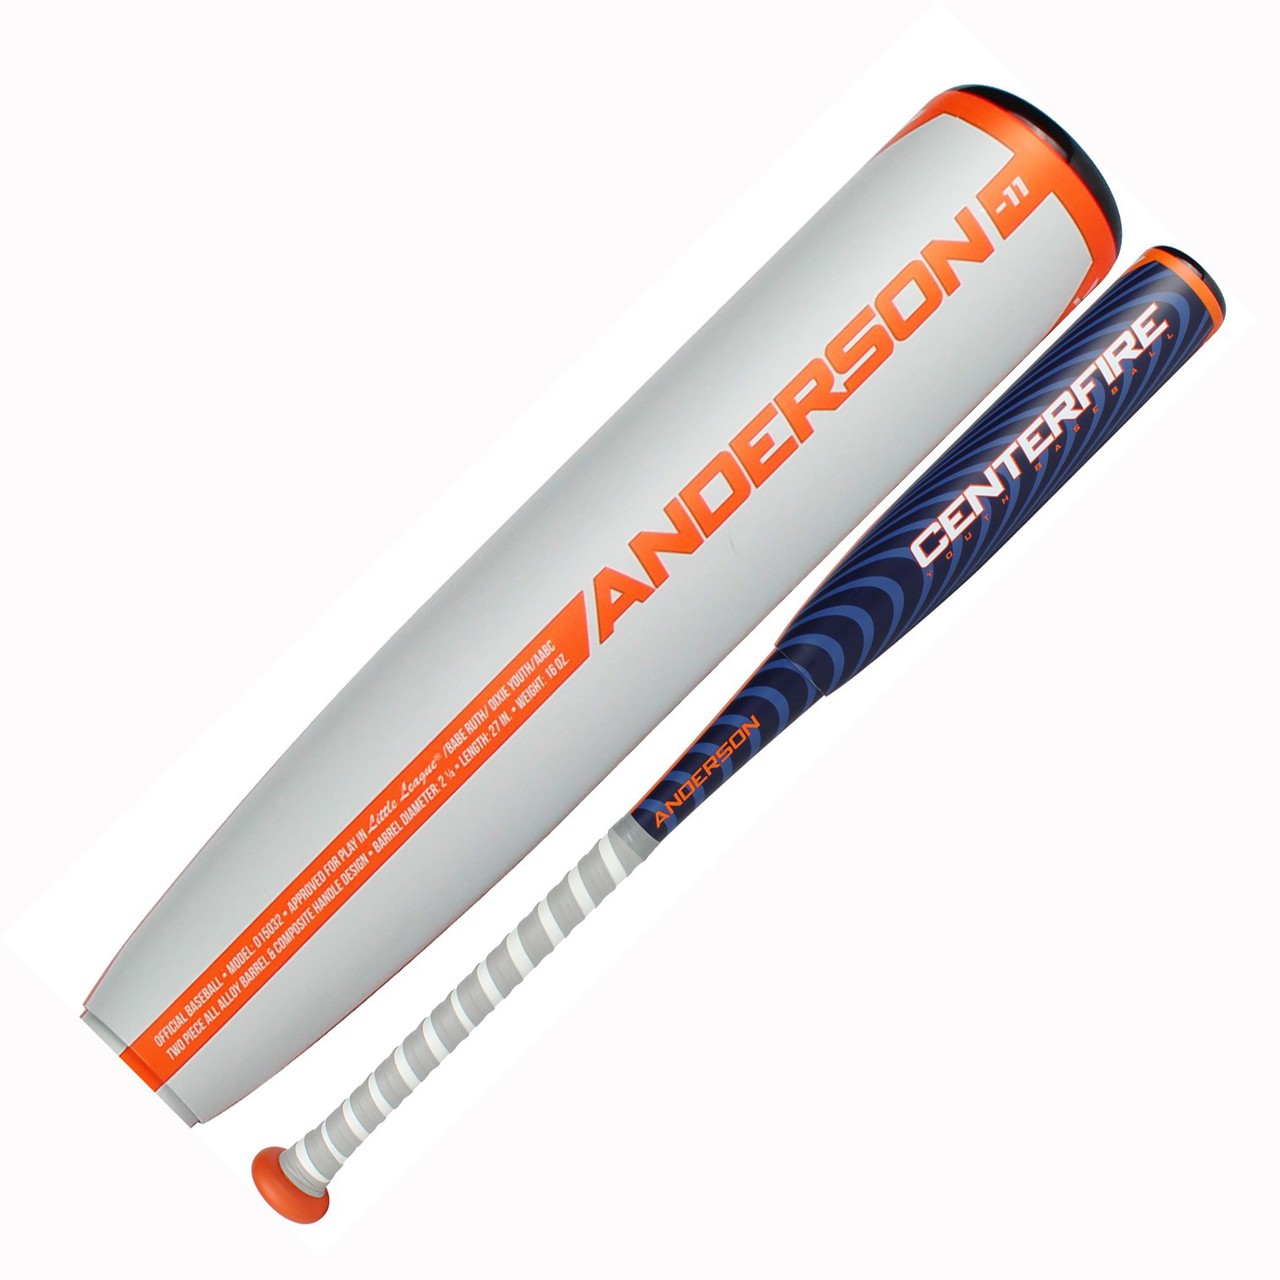 anderson-centerfire-30-inch-19-oz-youth-baseball-bat 015032-30-inch-19-oz Anderson 874147007709 The Anderson Centerfire baseball bat is our latest addition to our